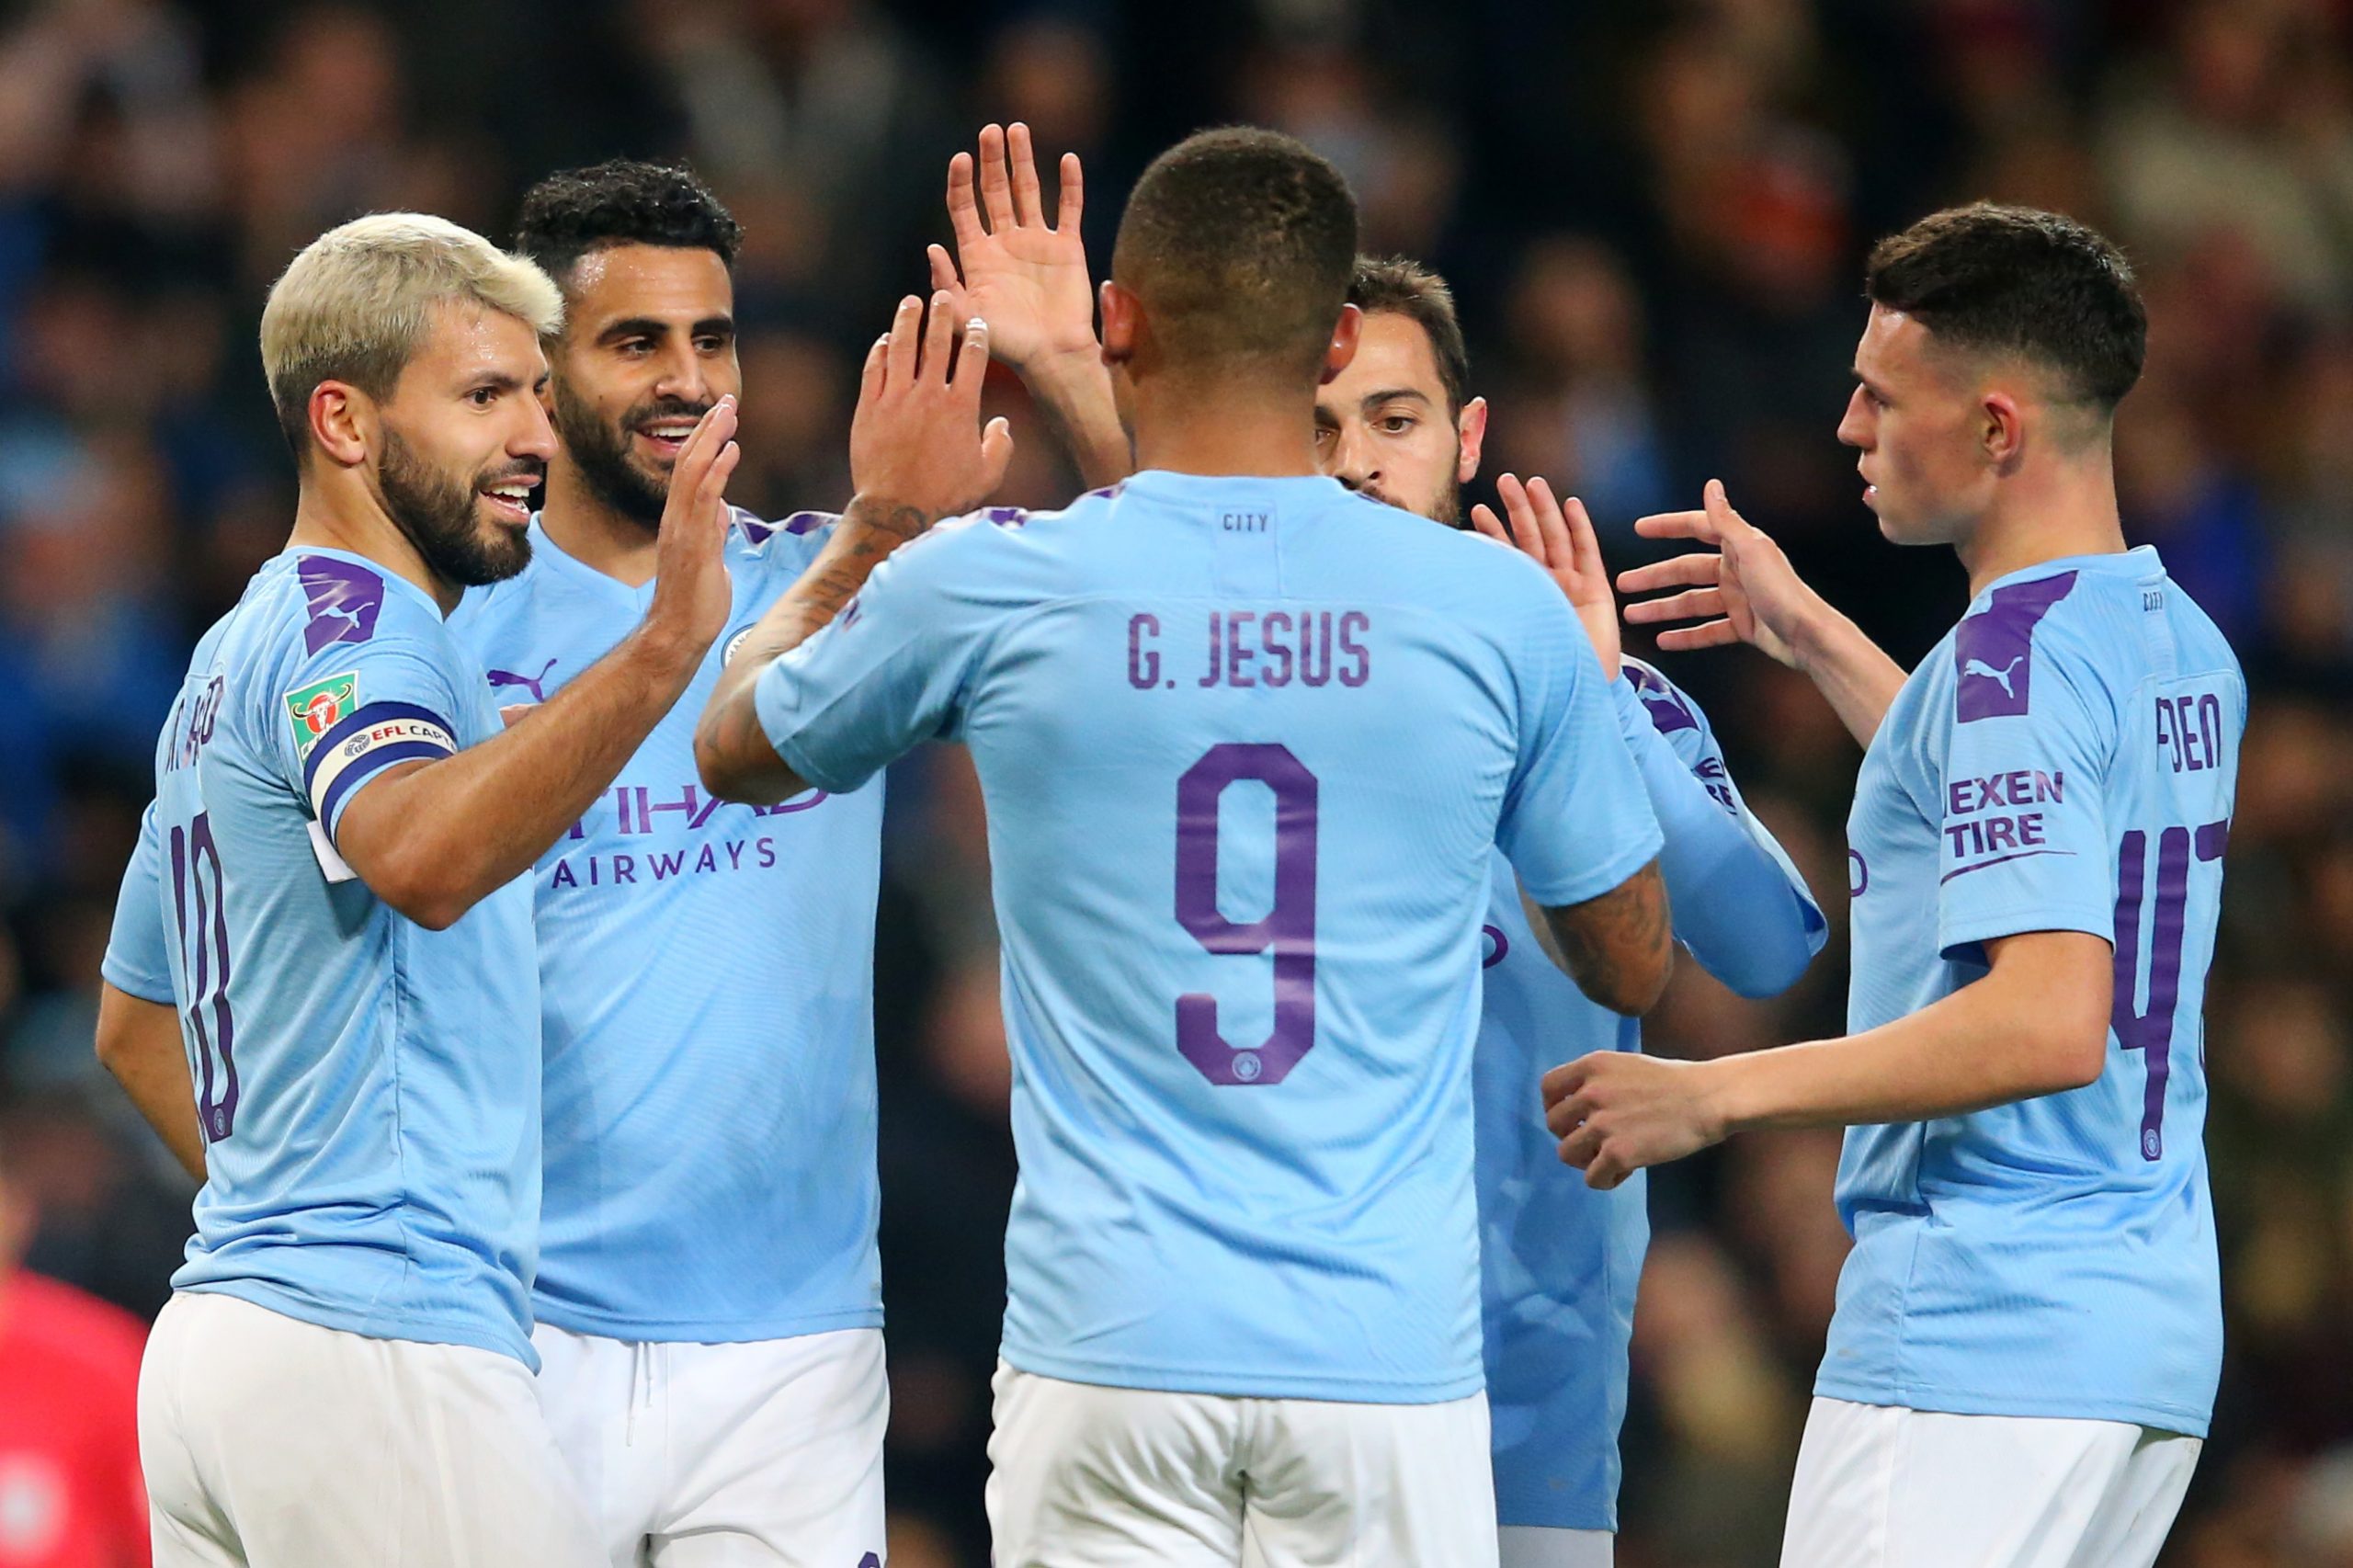 MANCHESTER, ENGLAND - OCTOBER 29: Sergio Aguero of Manchester City celebrates after scoring his team's third goal with Riyad Mahrez, Gabriel Jesus, Bernardo Silva and Phil Foden of Manchester City during the Carabao Cup Round of 16 match between Manchester City and Southampton at Etihad Stadium on October 29, 2019 in Manchester, England. (Photo by Alex Livesey/Getty Images)